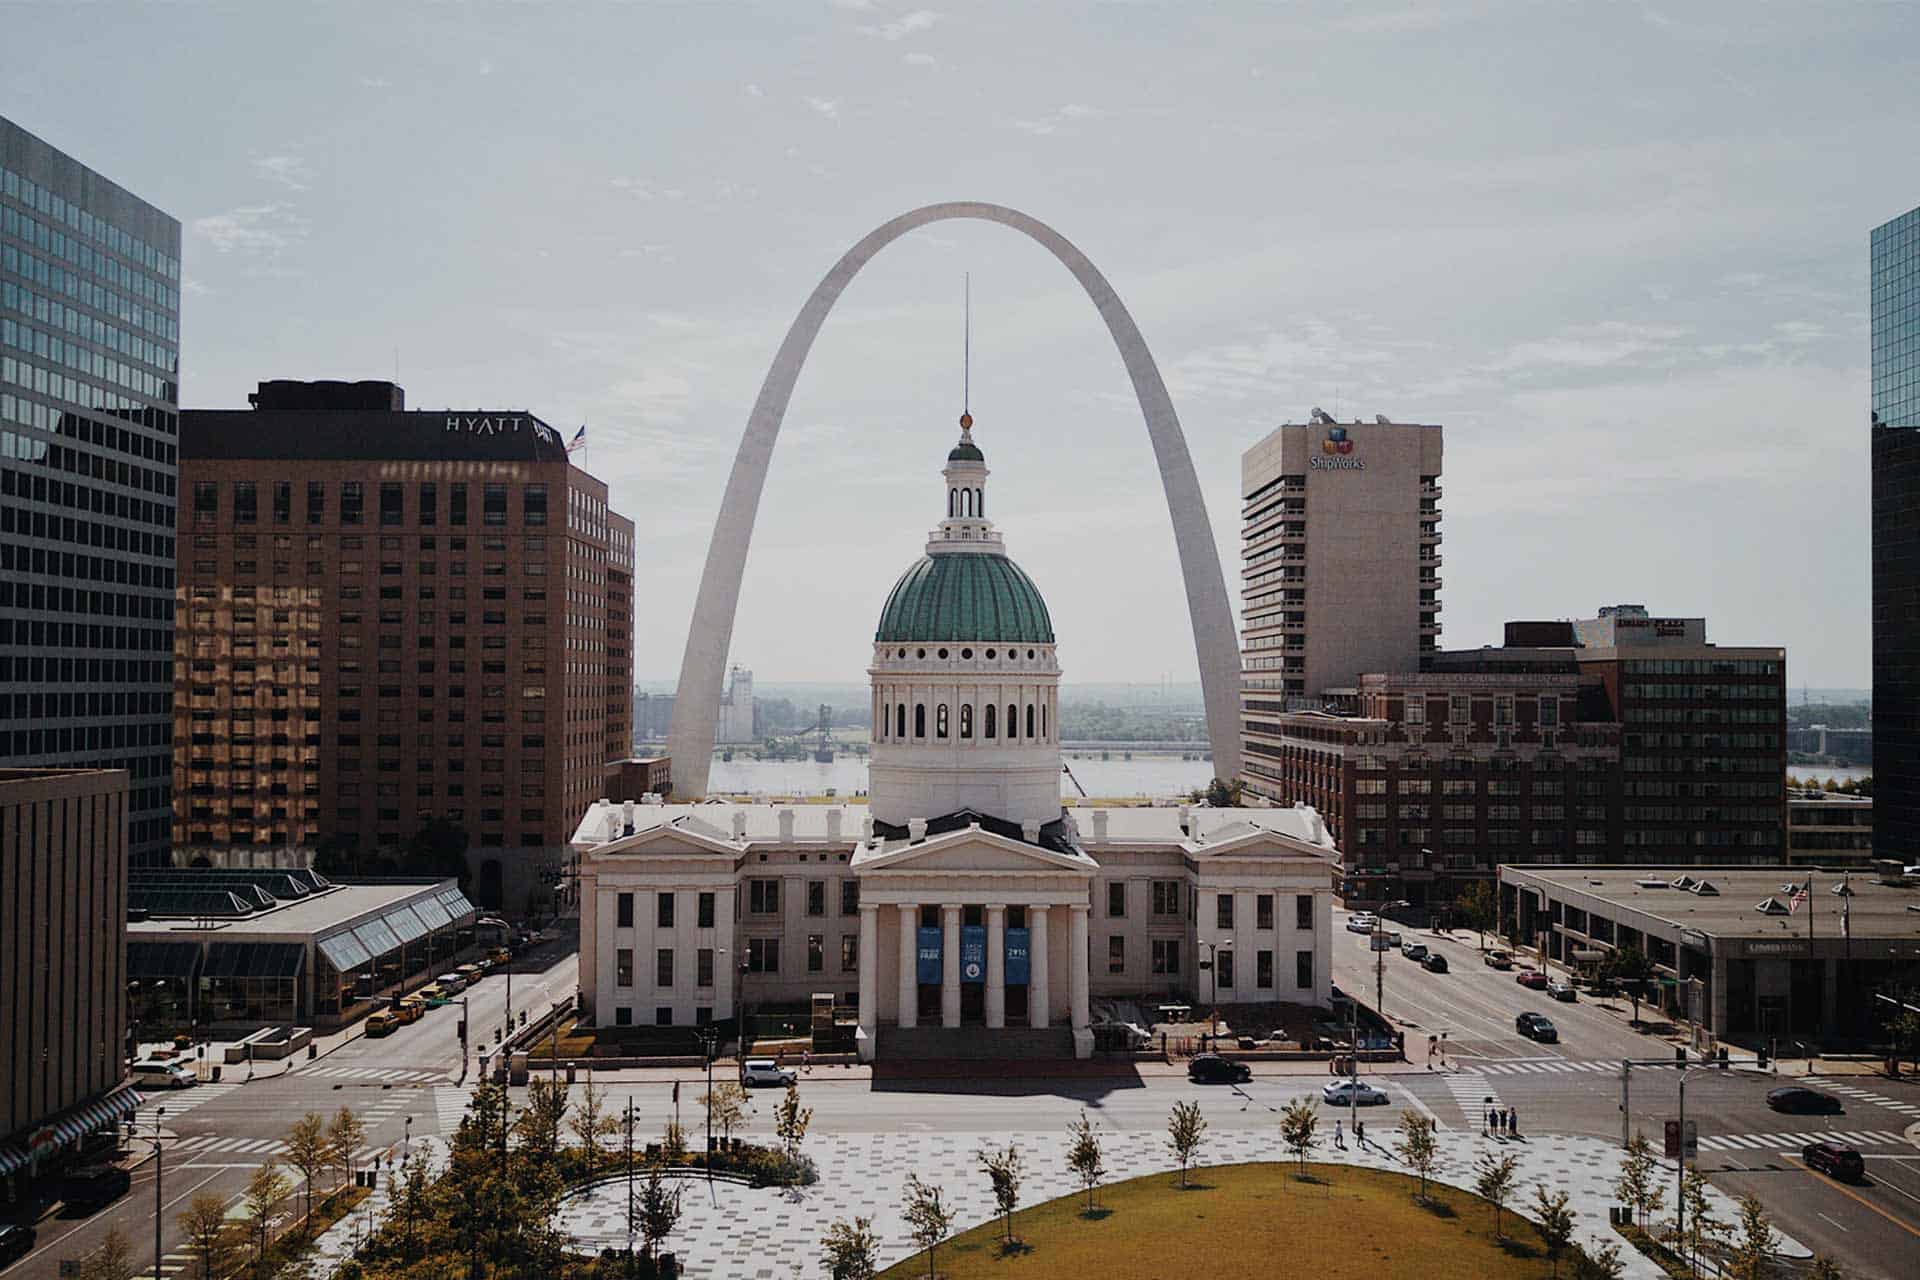 21 Best Things To Do In St. Louis, Missouri (2022 Guide)